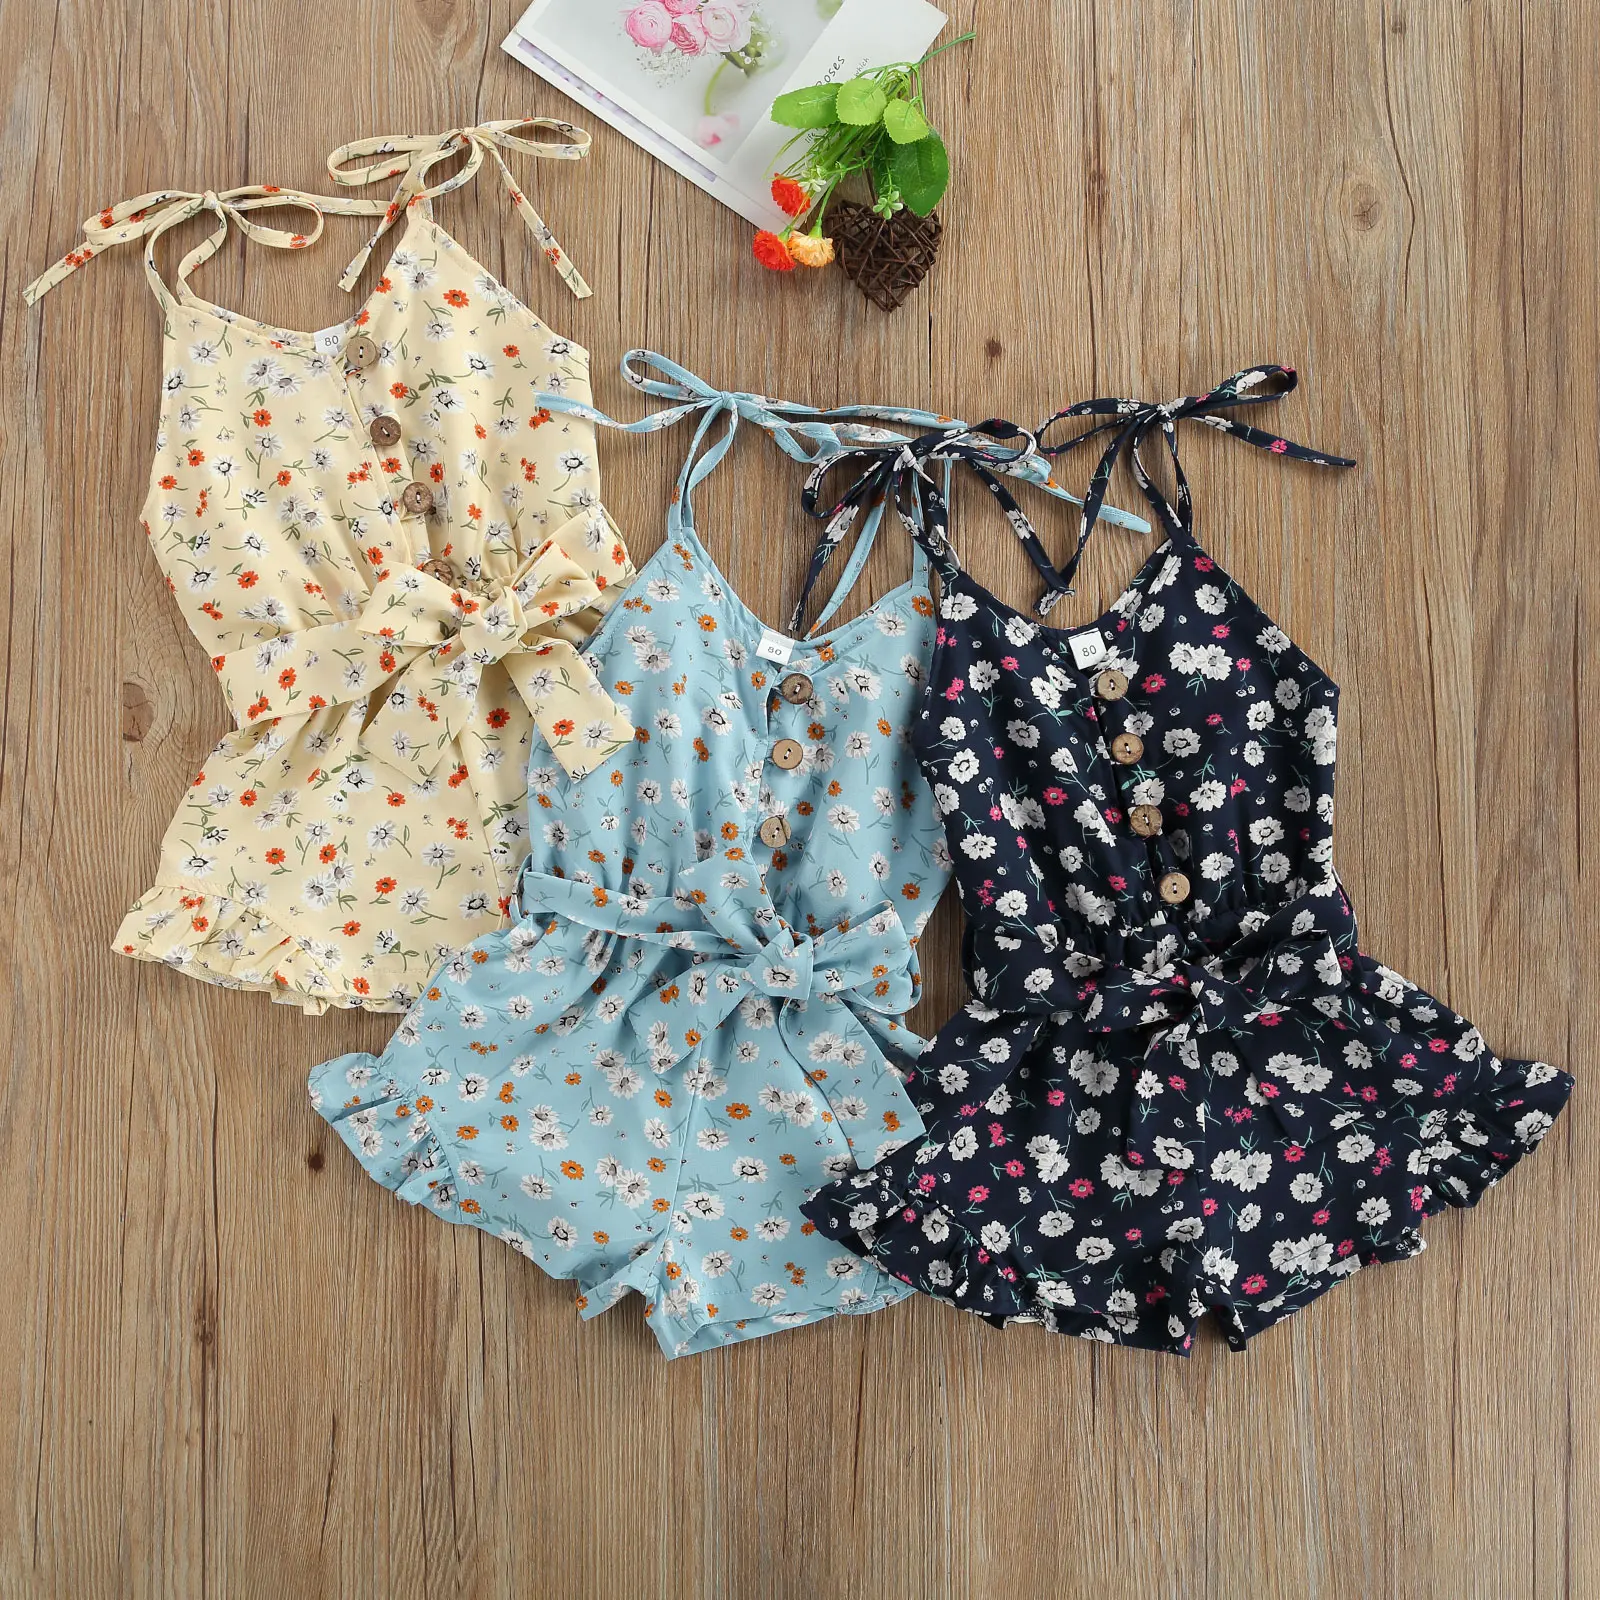 

OPPERIAYA Summer Children Floral Print Sling Romper with Ruffles Baby Girls Sleeveless V-neck Short Jumpsuit with Waistband